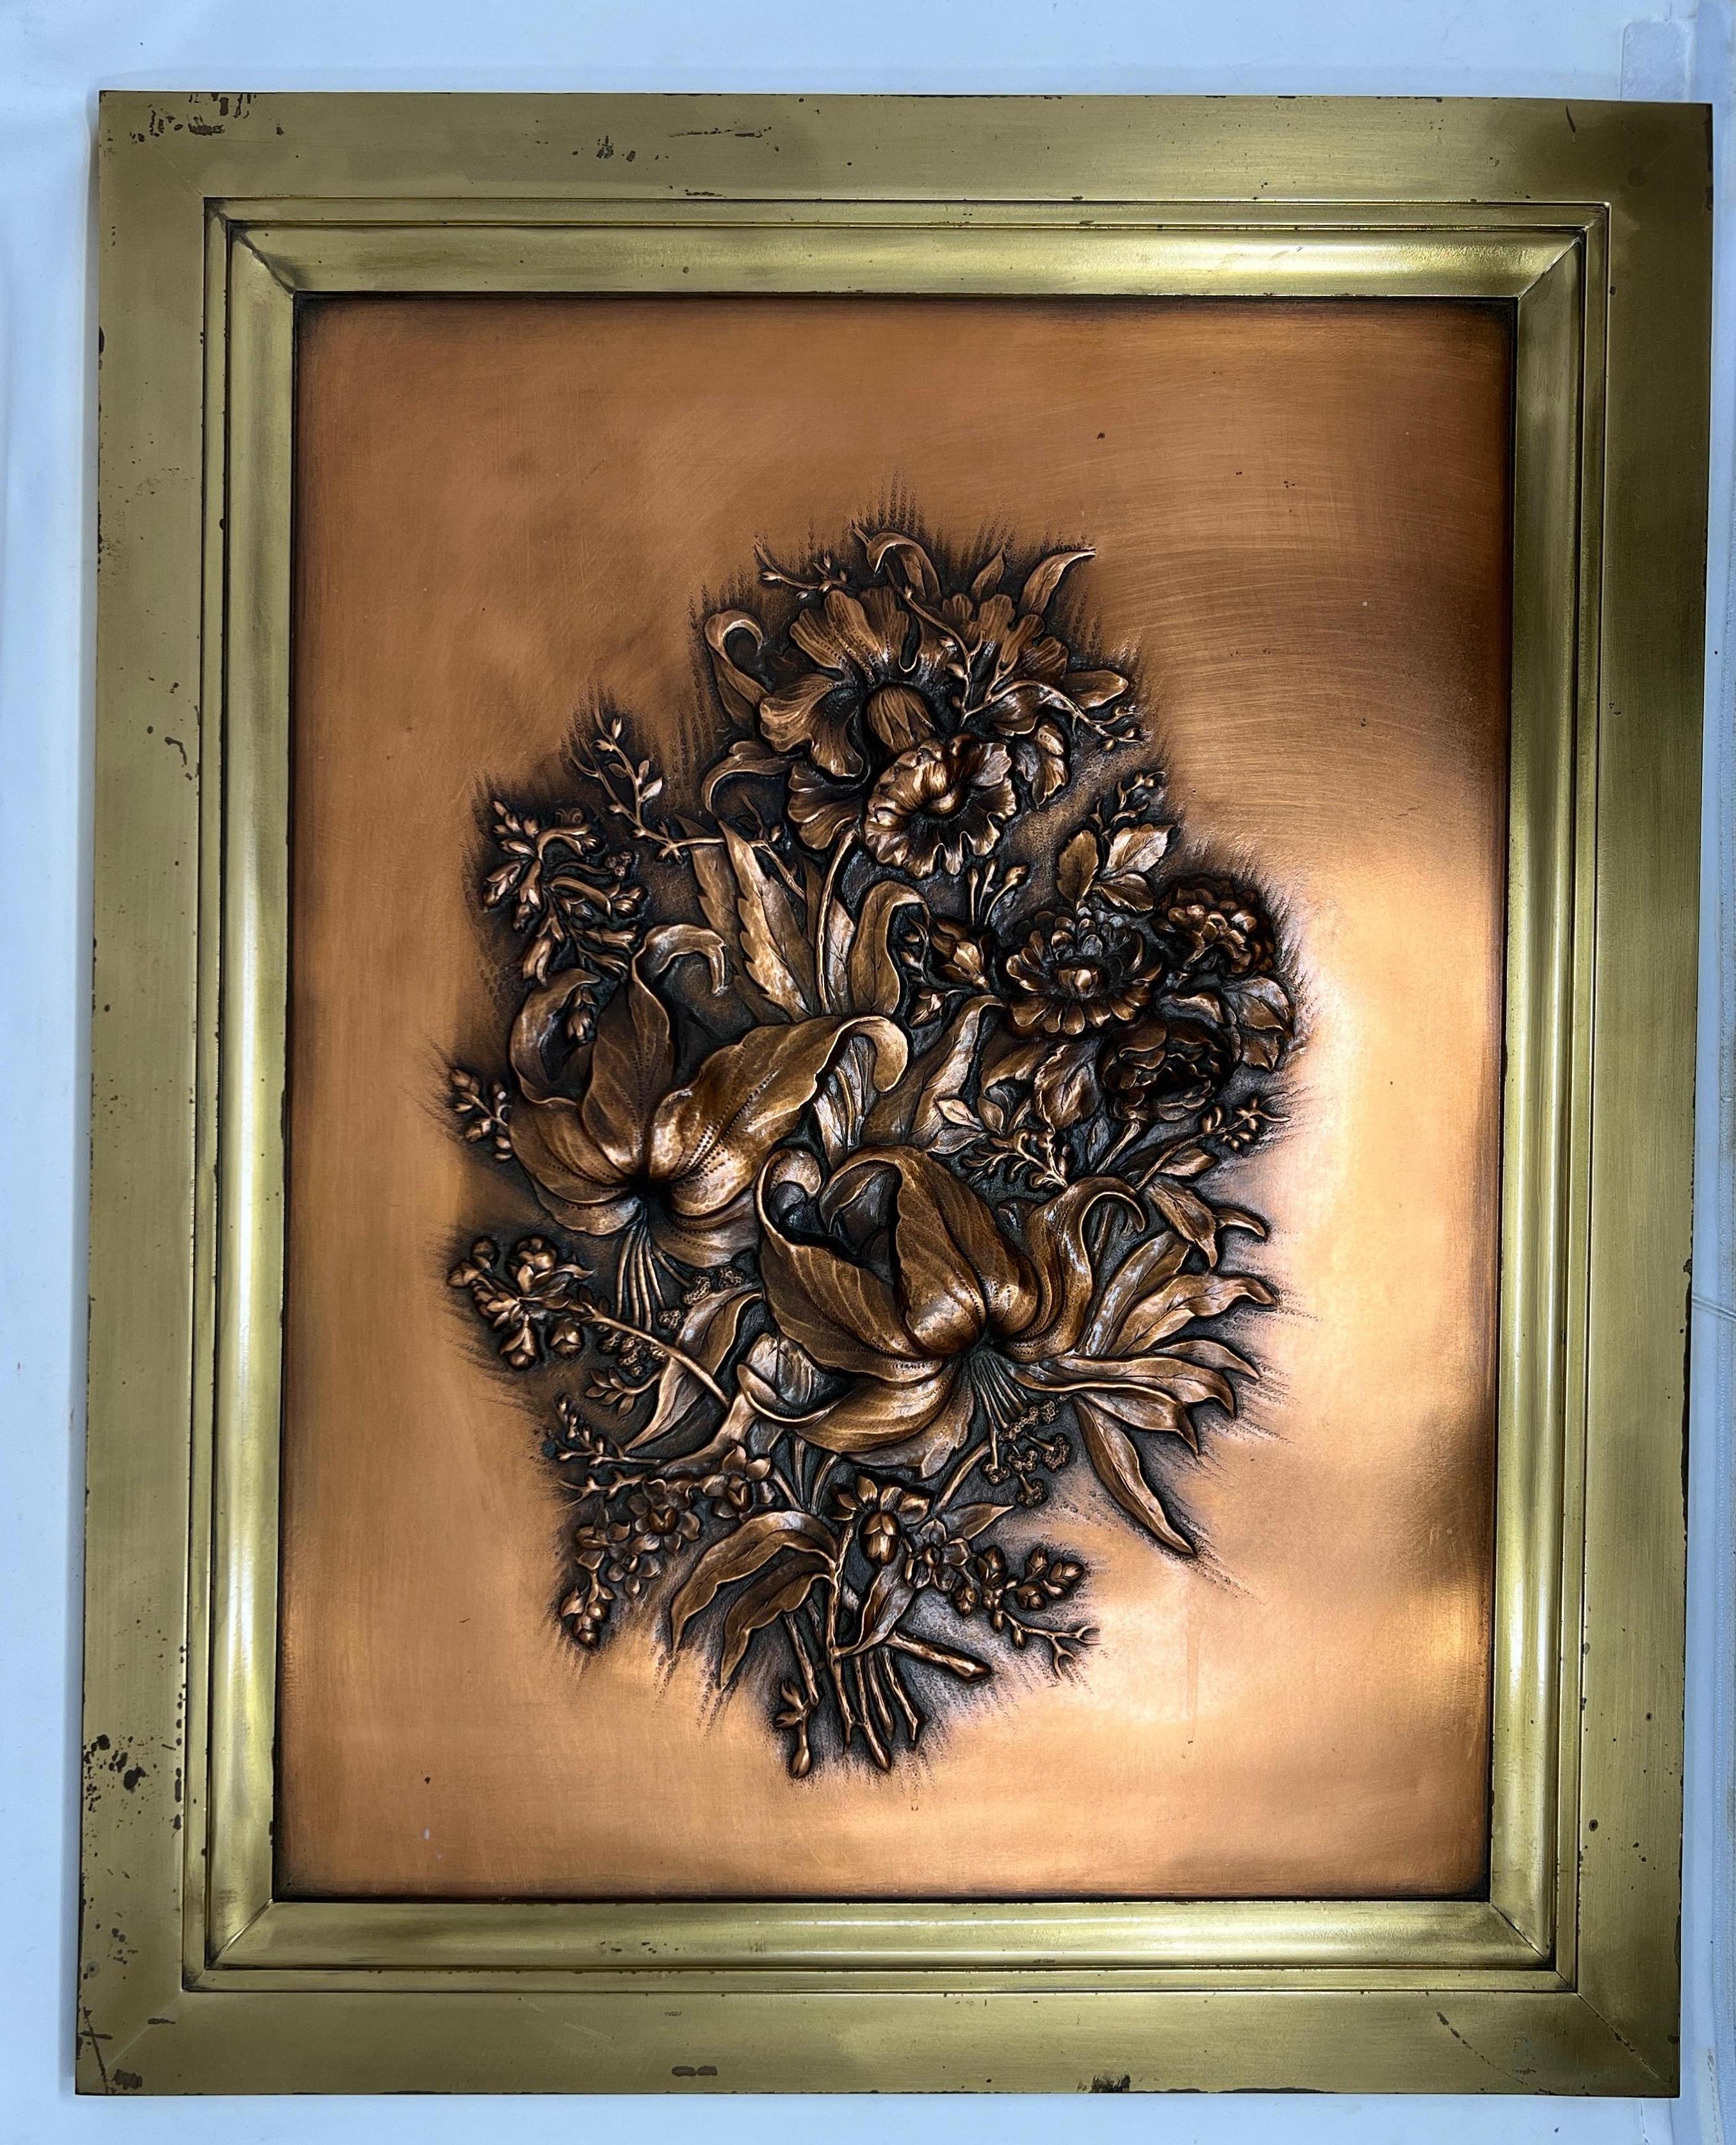 Nicely rendered repousse florals in copper.